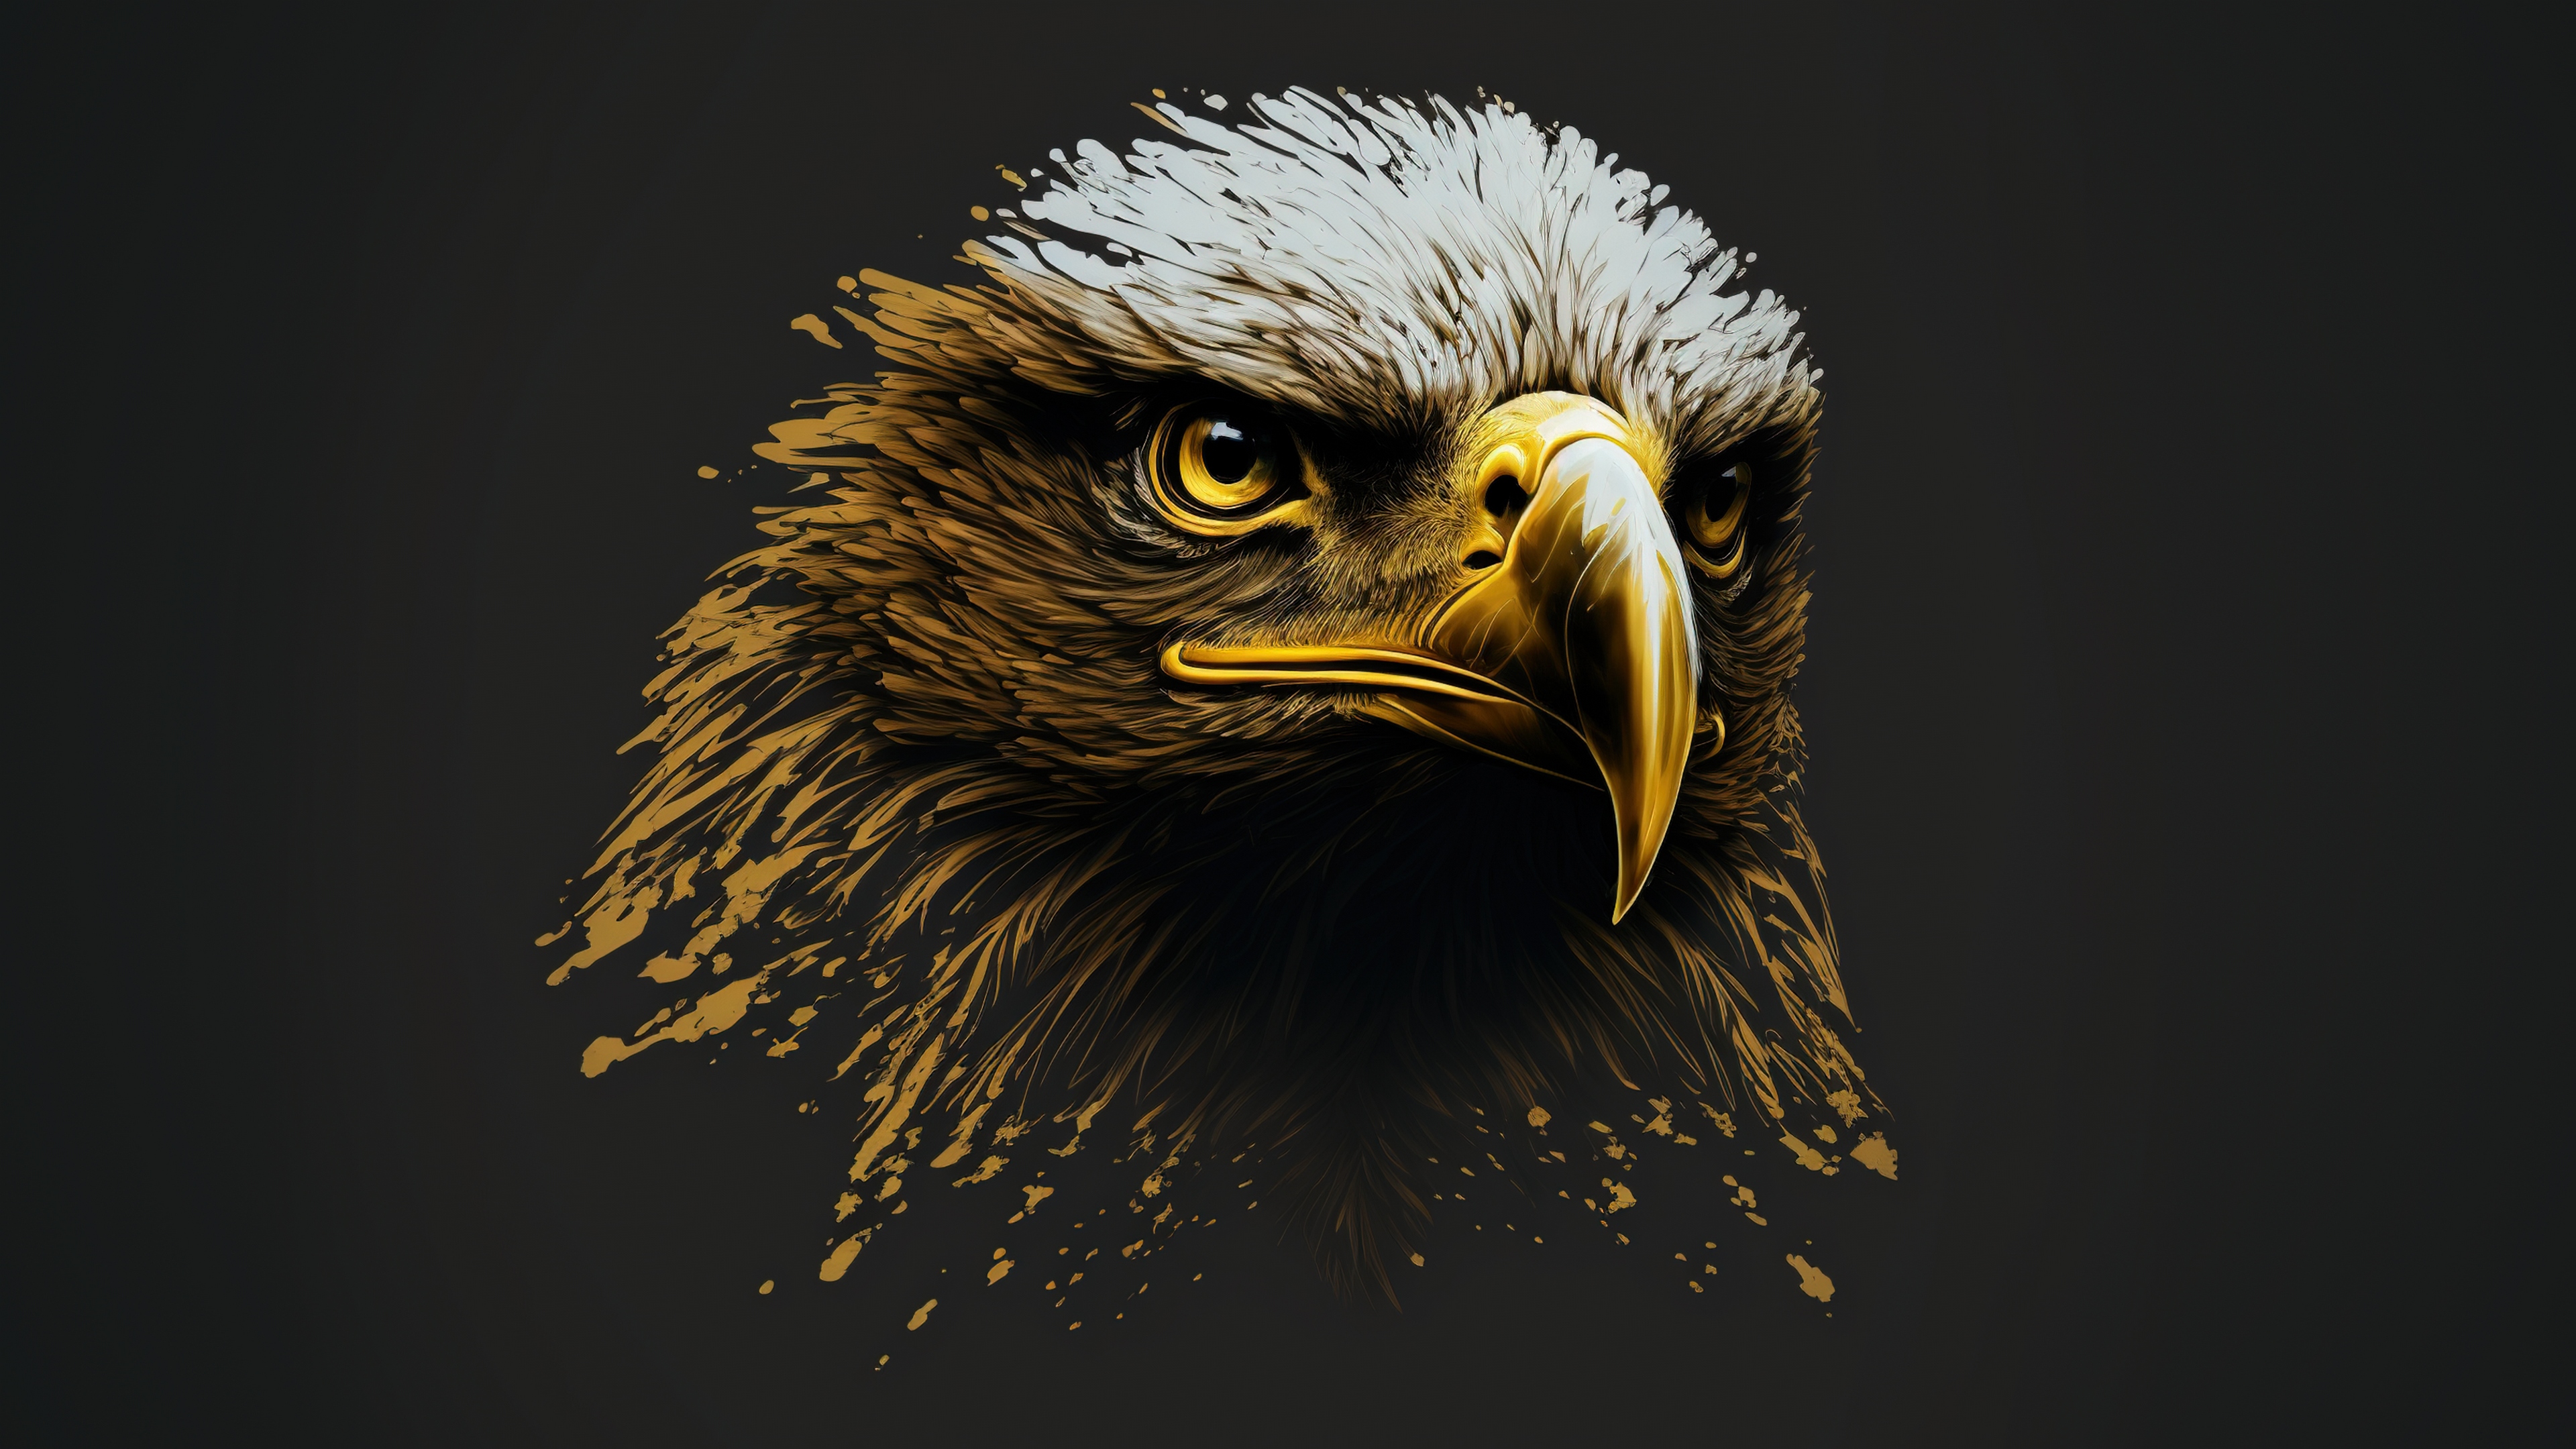 Portrait of an eagle on a dark background